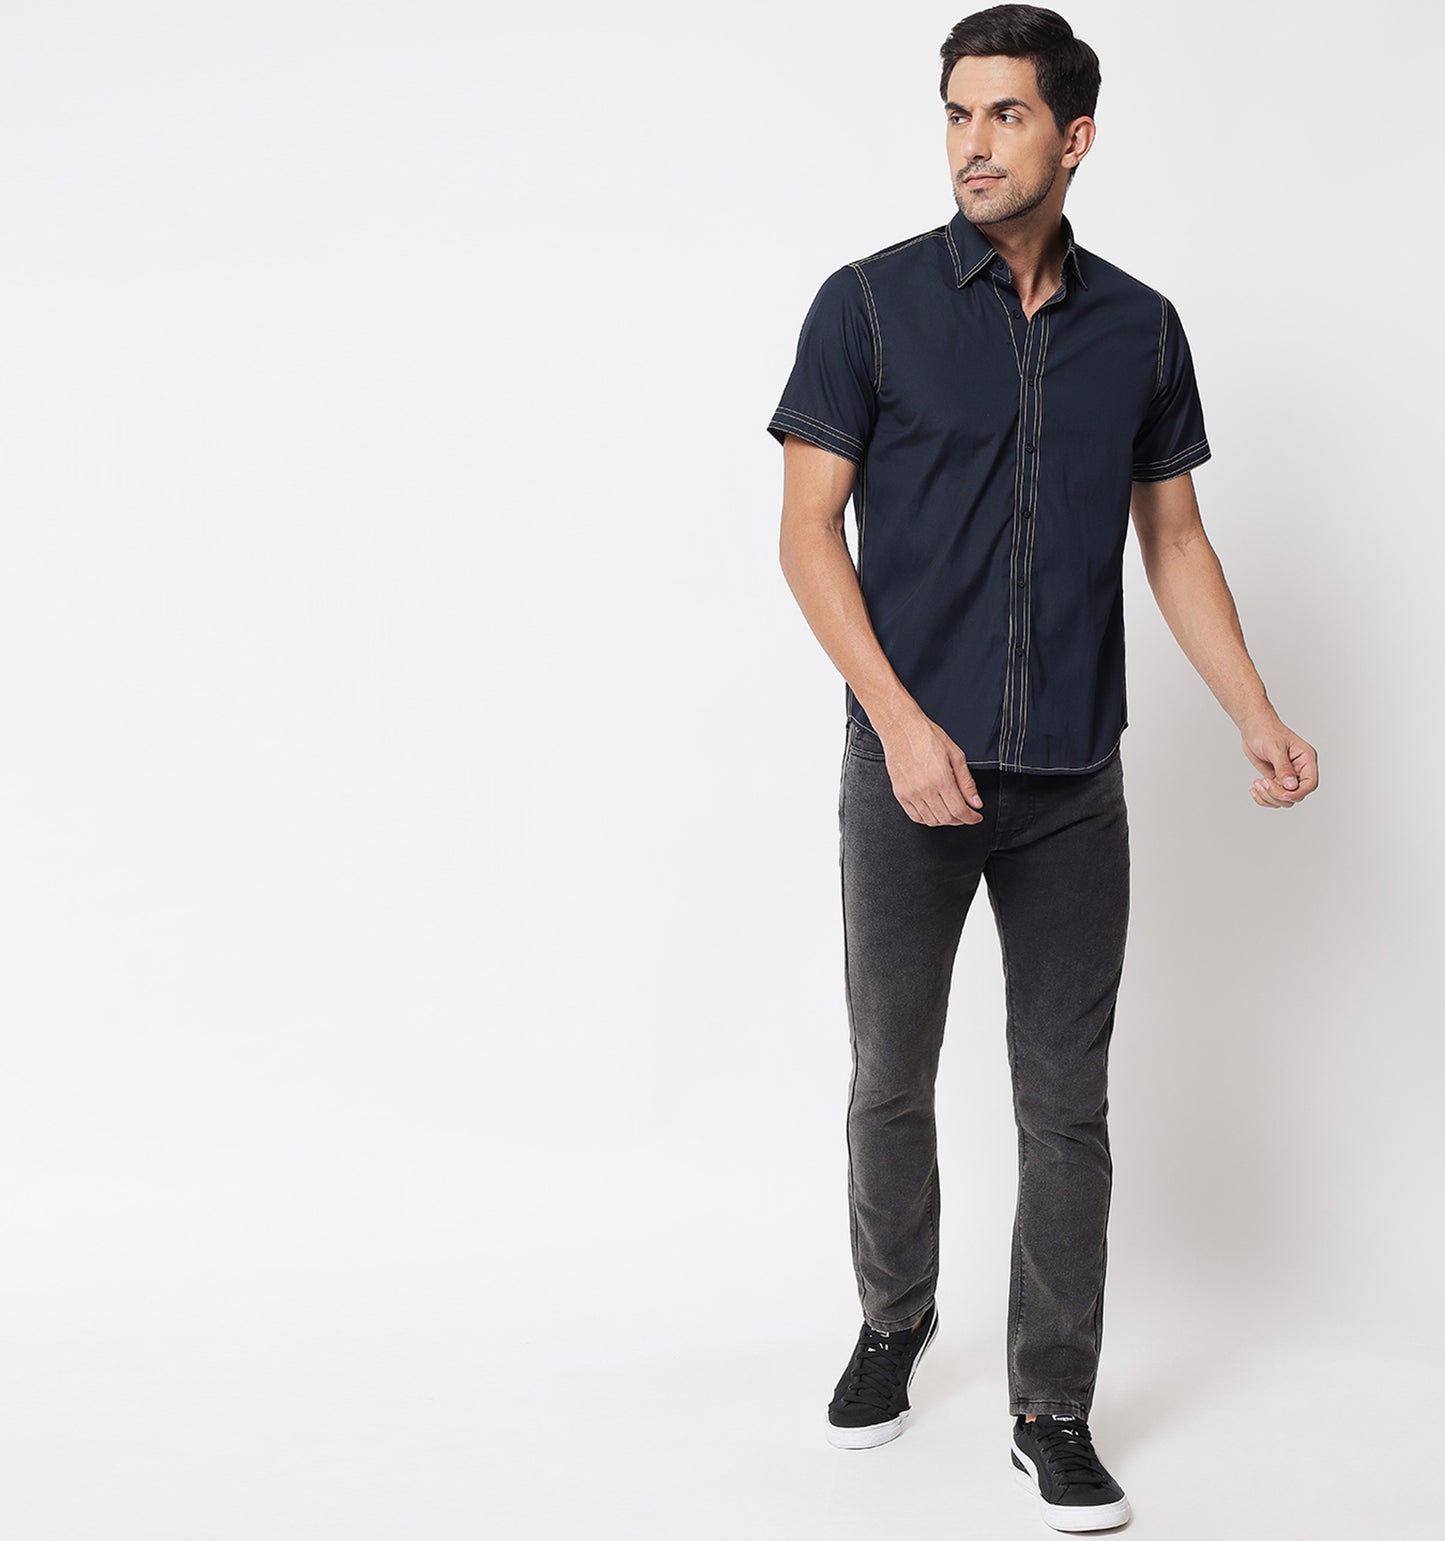 Outlines Shirt Navy Short Sleeves